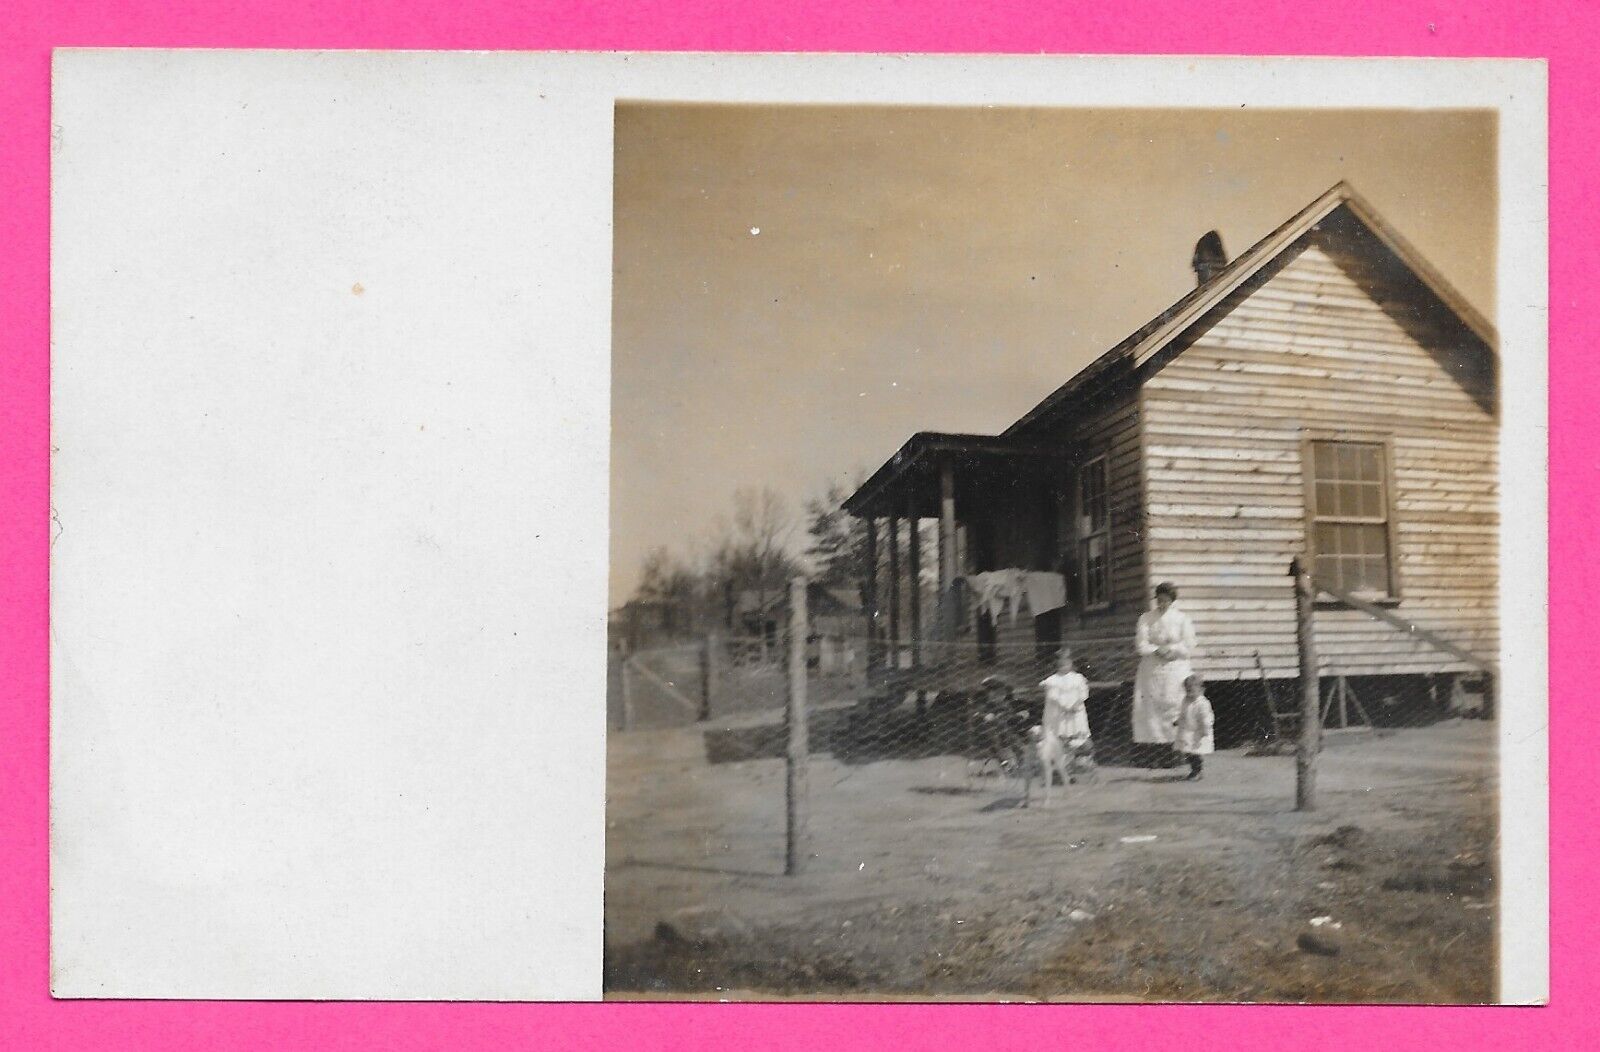 Vintage Old Original Photo Woman & Children Farm House in the South - Post Card